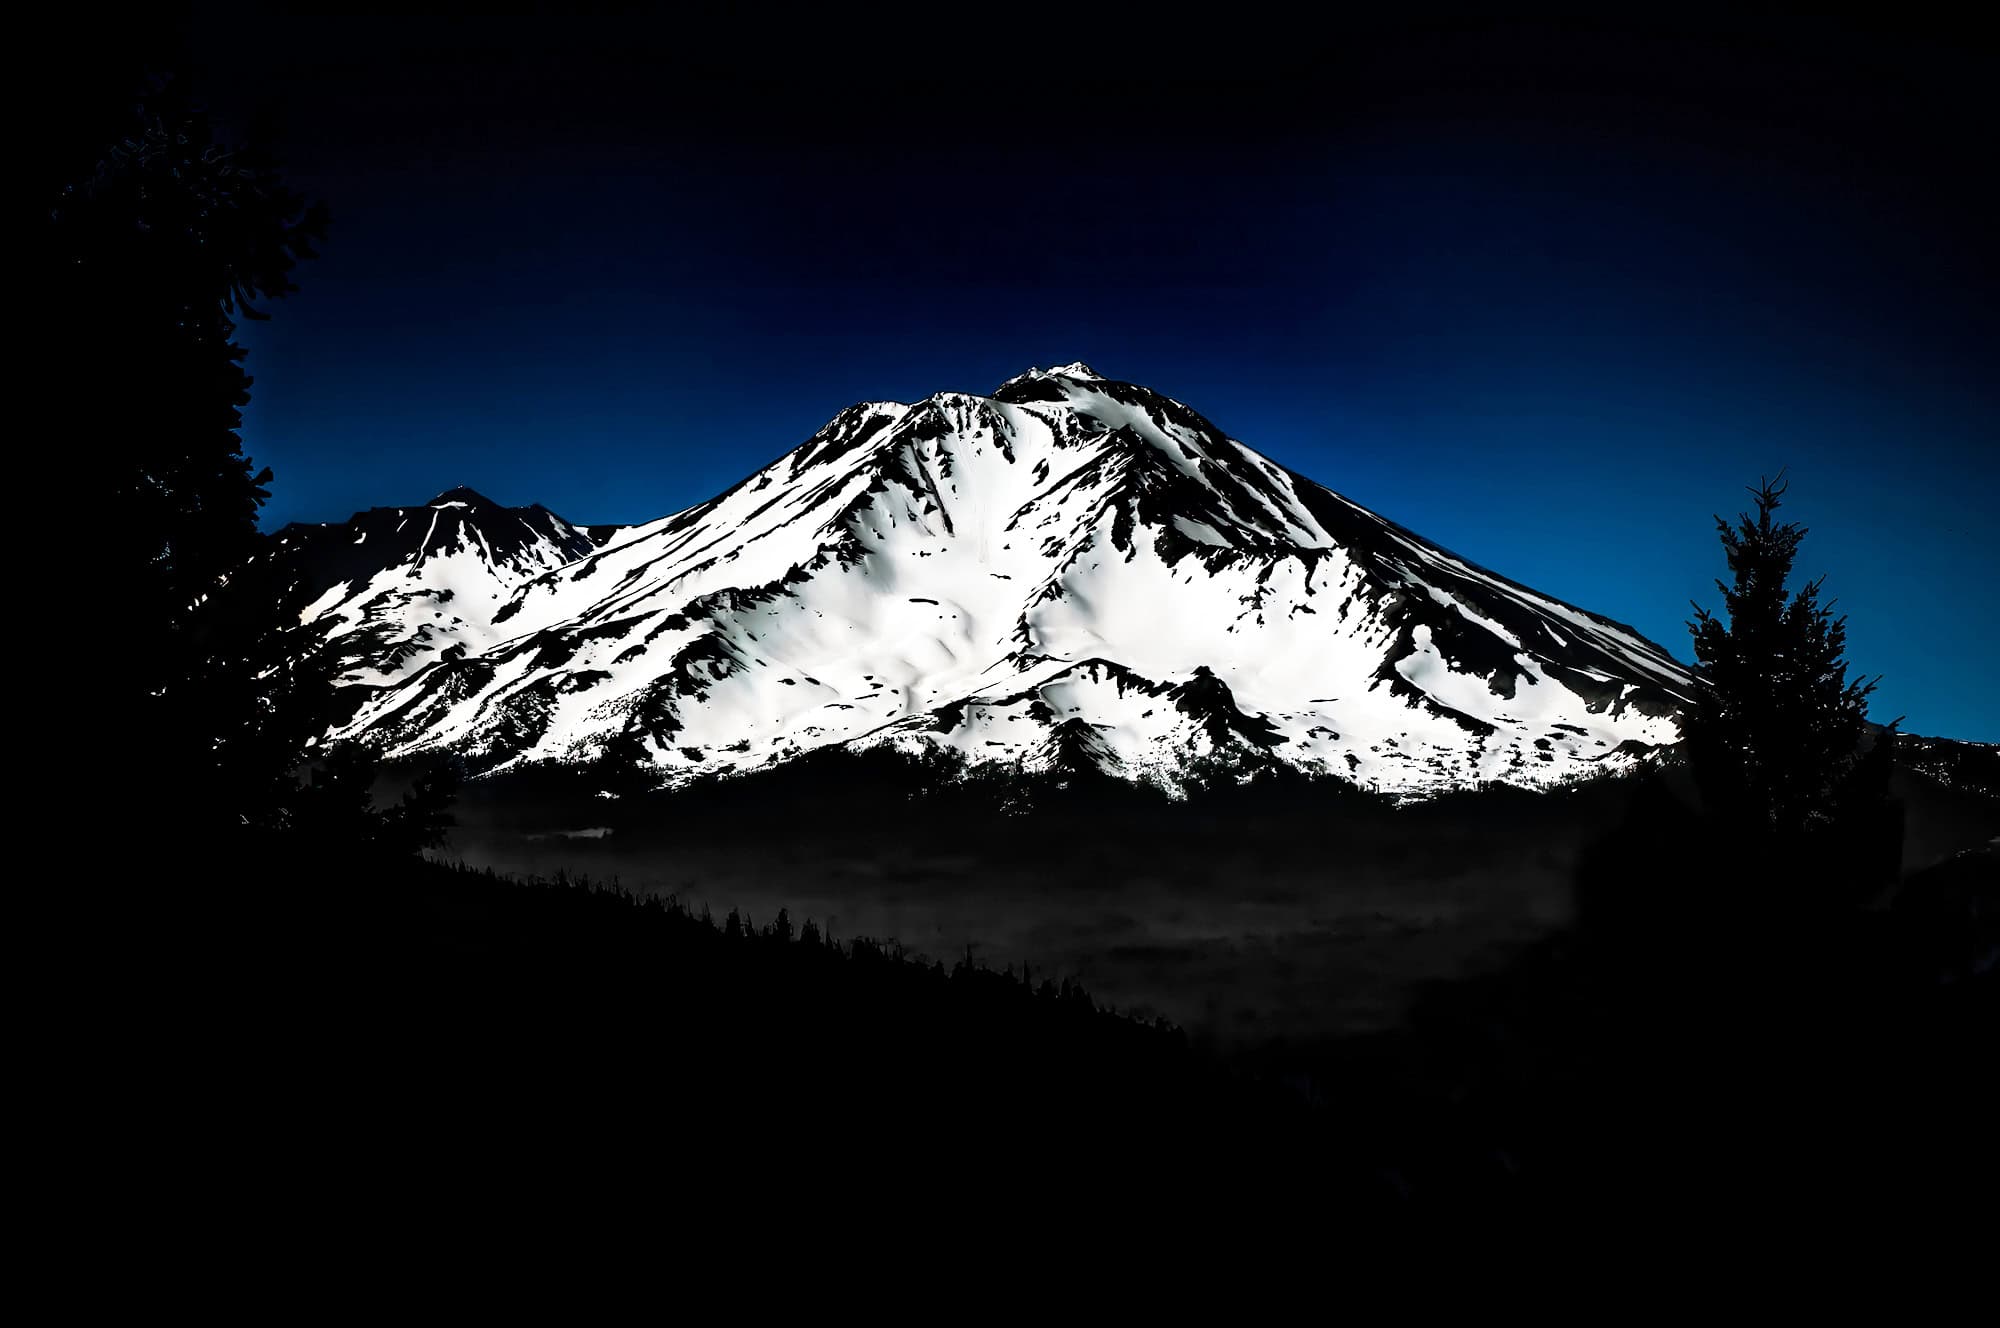 A snow covered Mount Shasta with a cool blue sky background